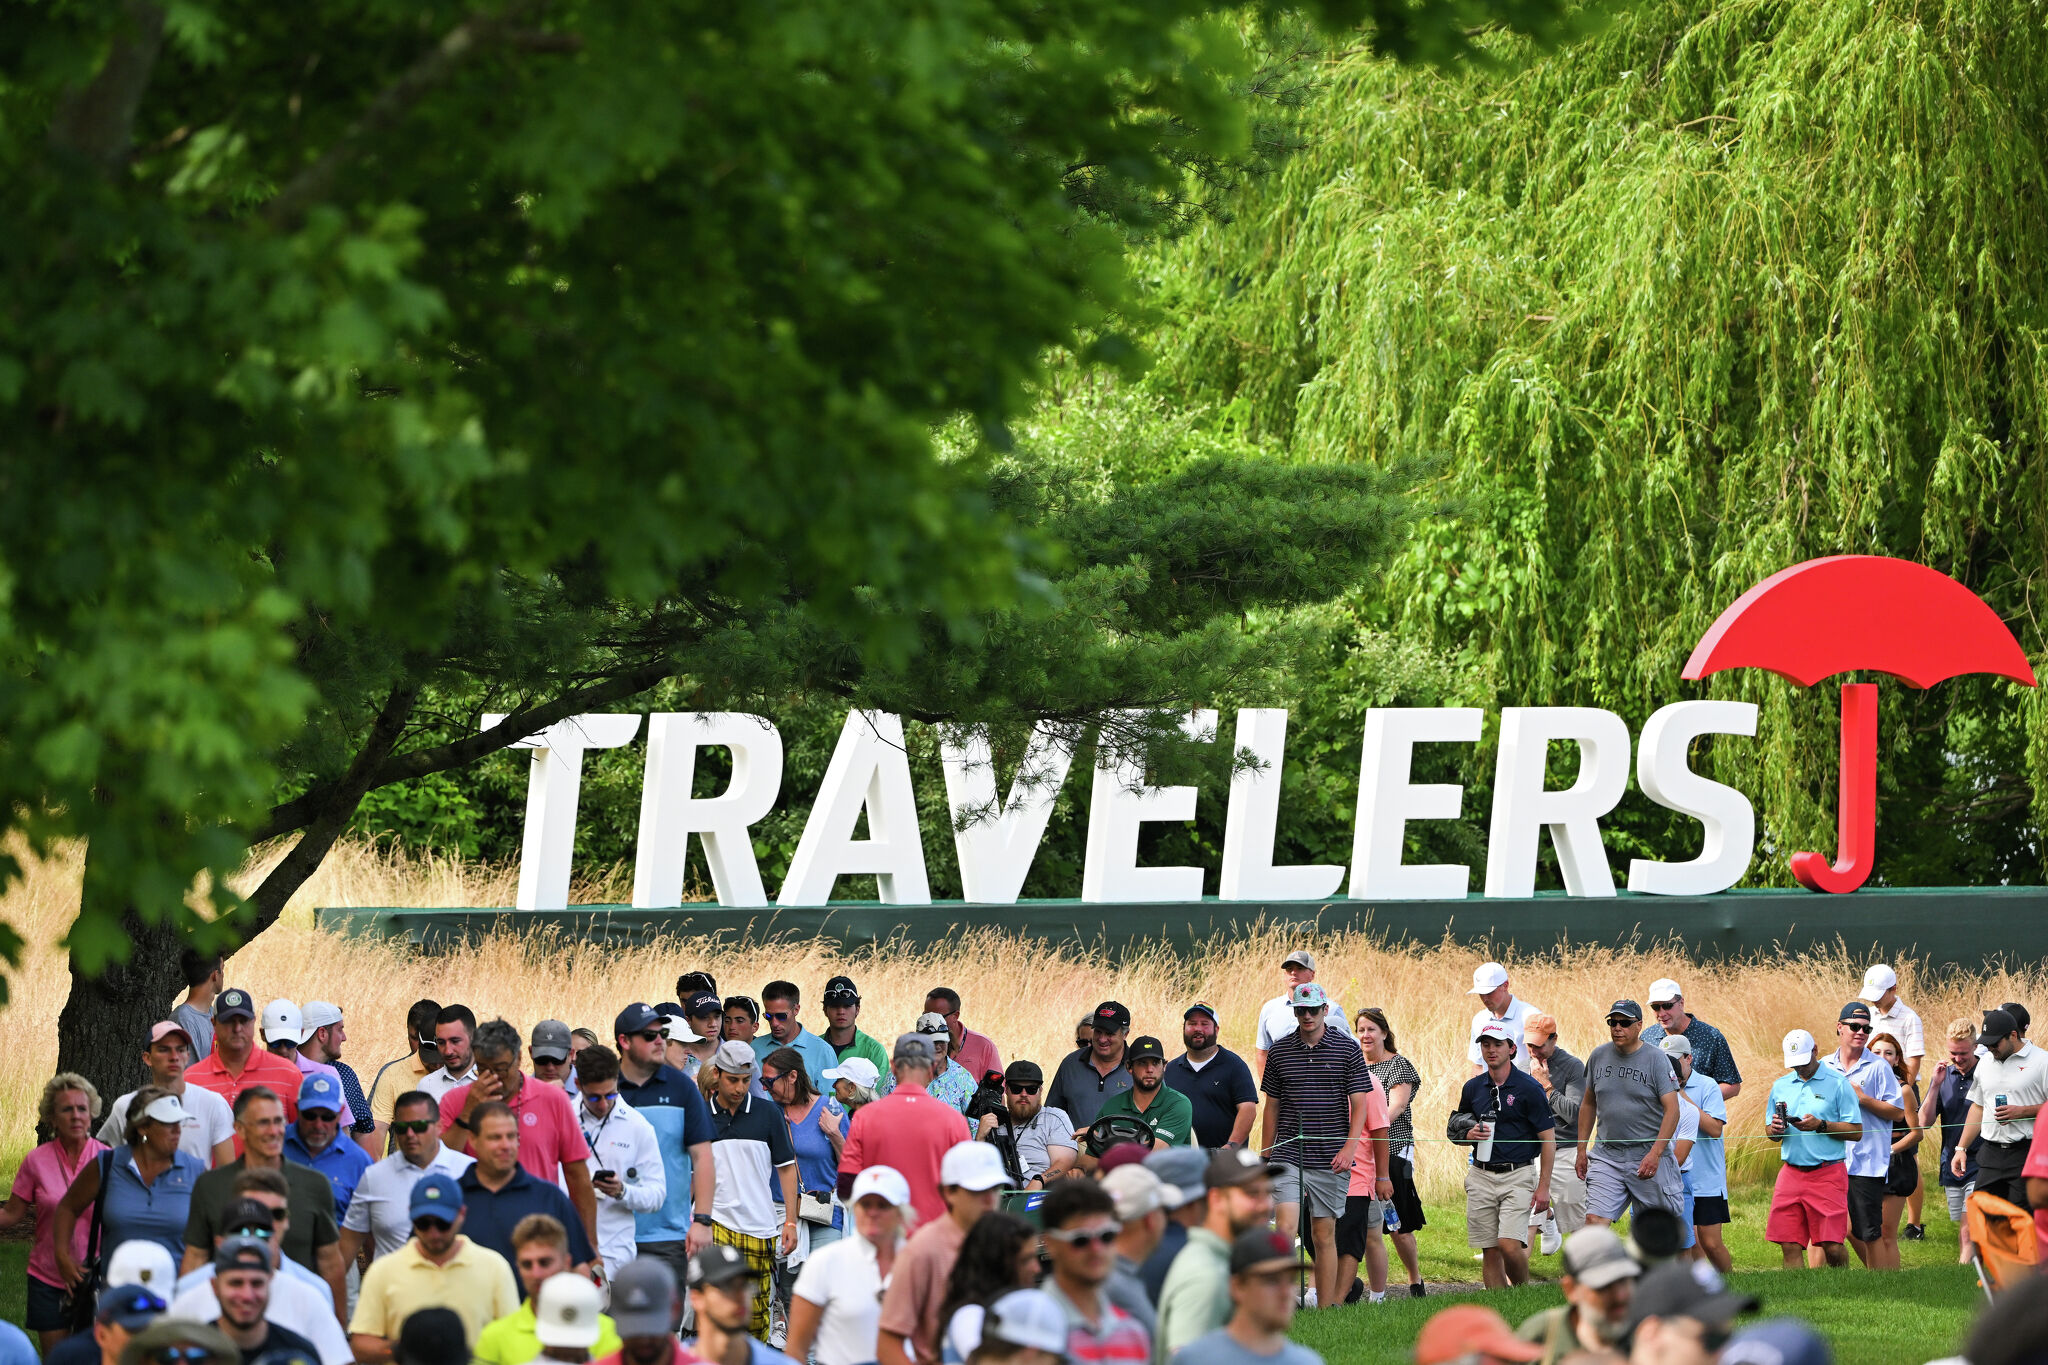 Cromwell weather forecast calls for rain during Travelers Championship